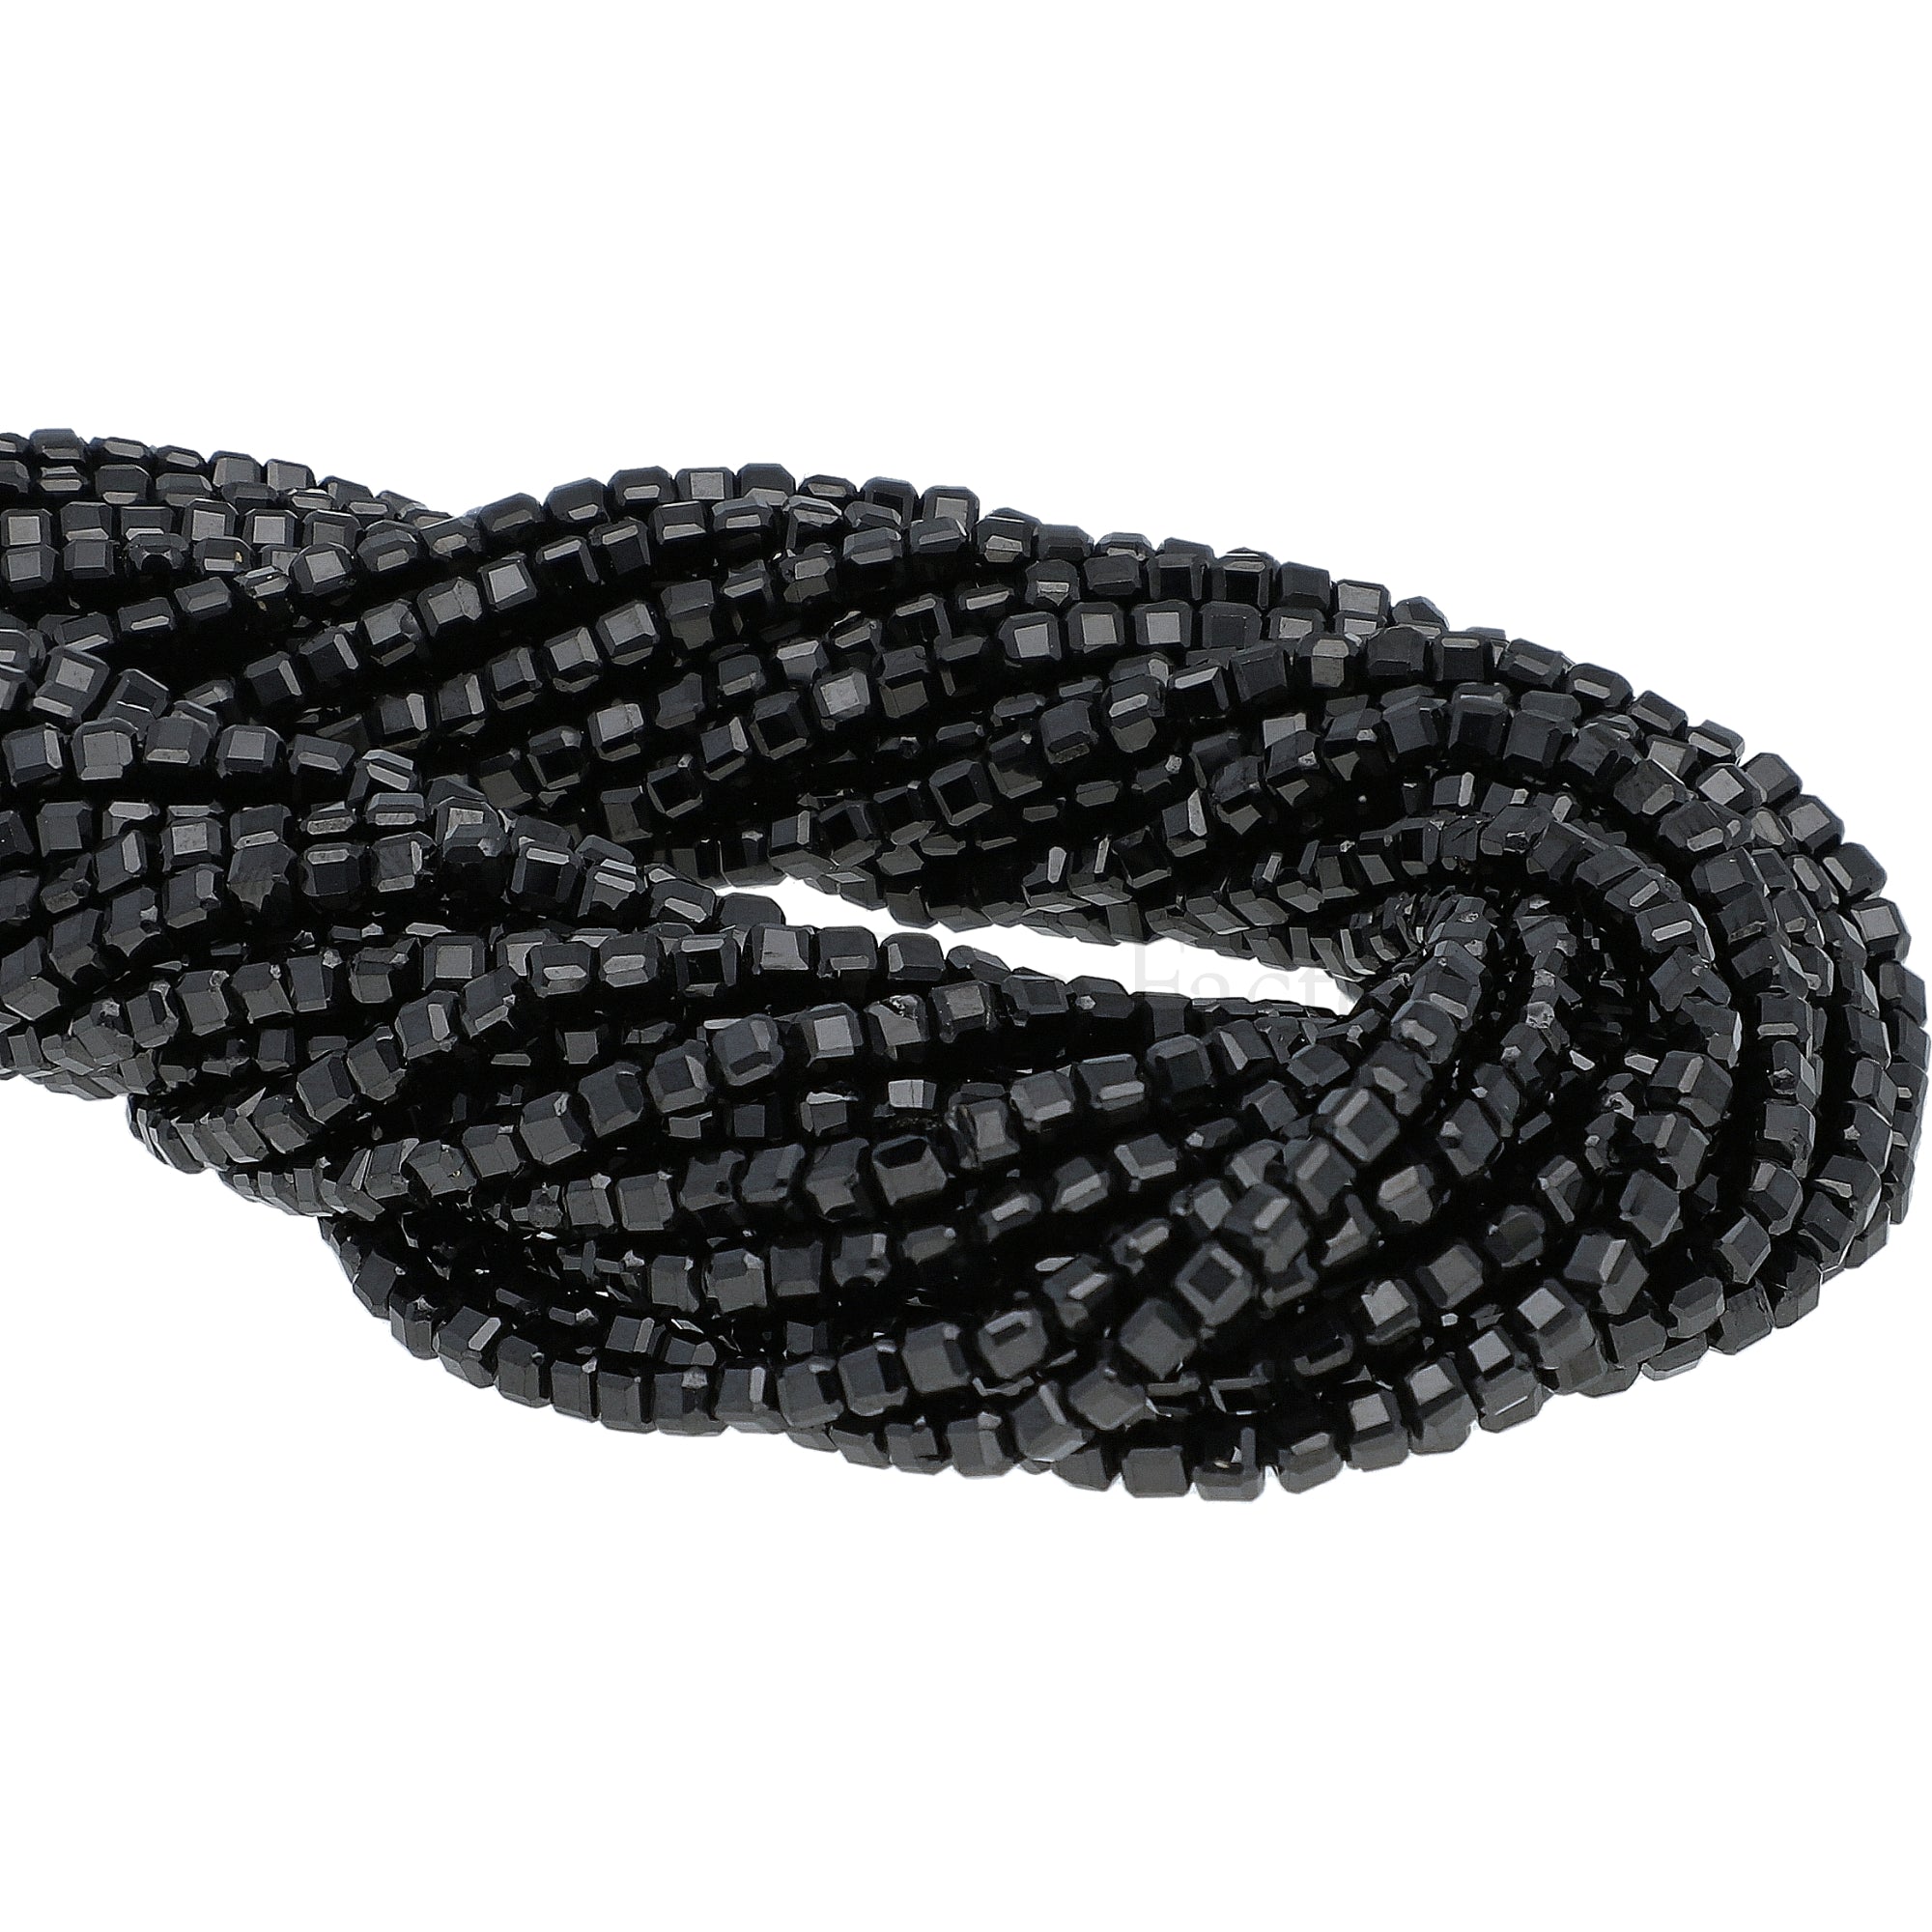 2.3-2.5 MM Black Spinel Faceted Box Beads